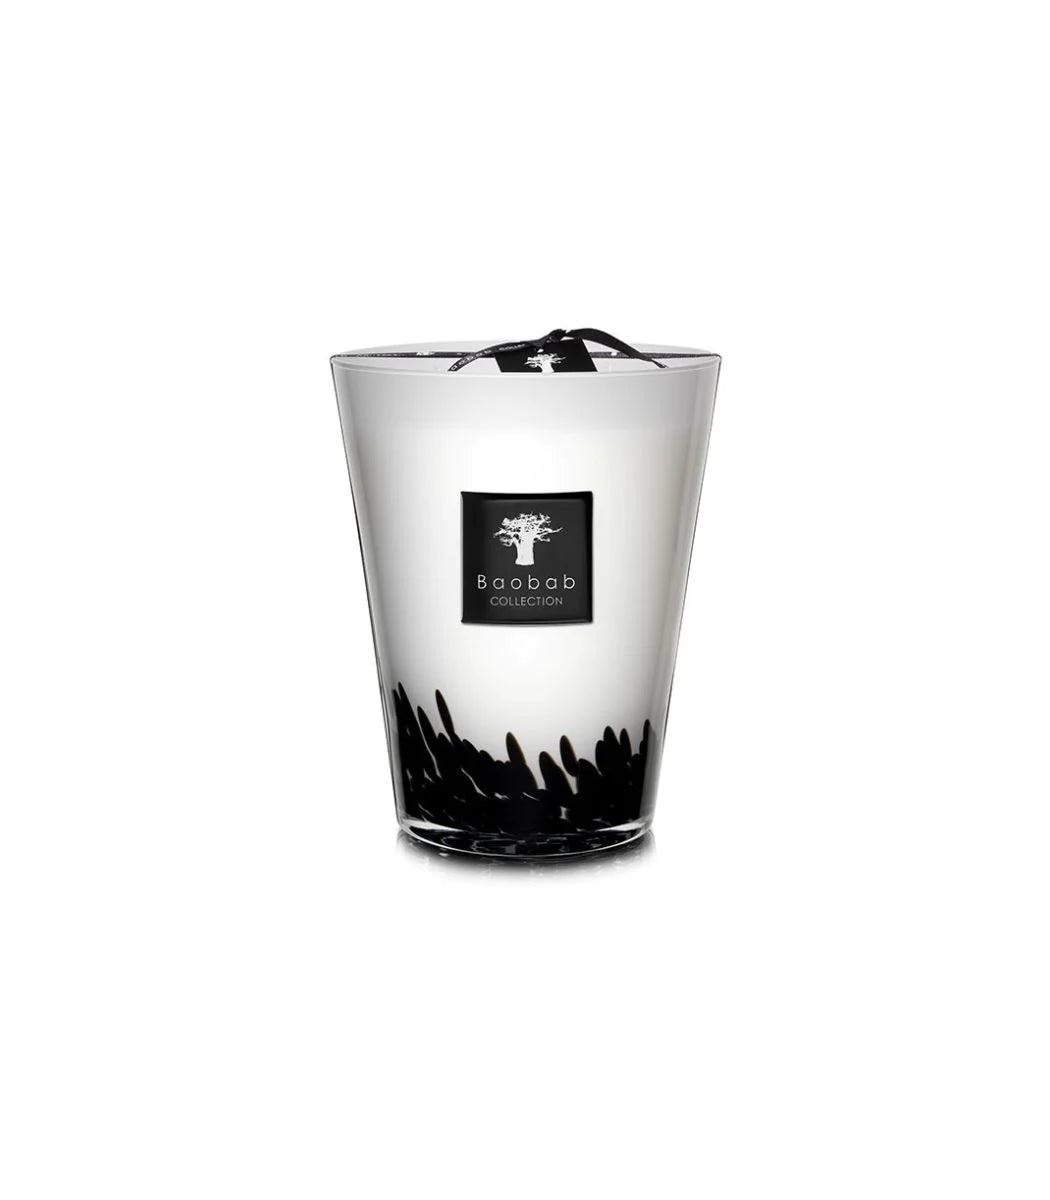 Feathers Candle